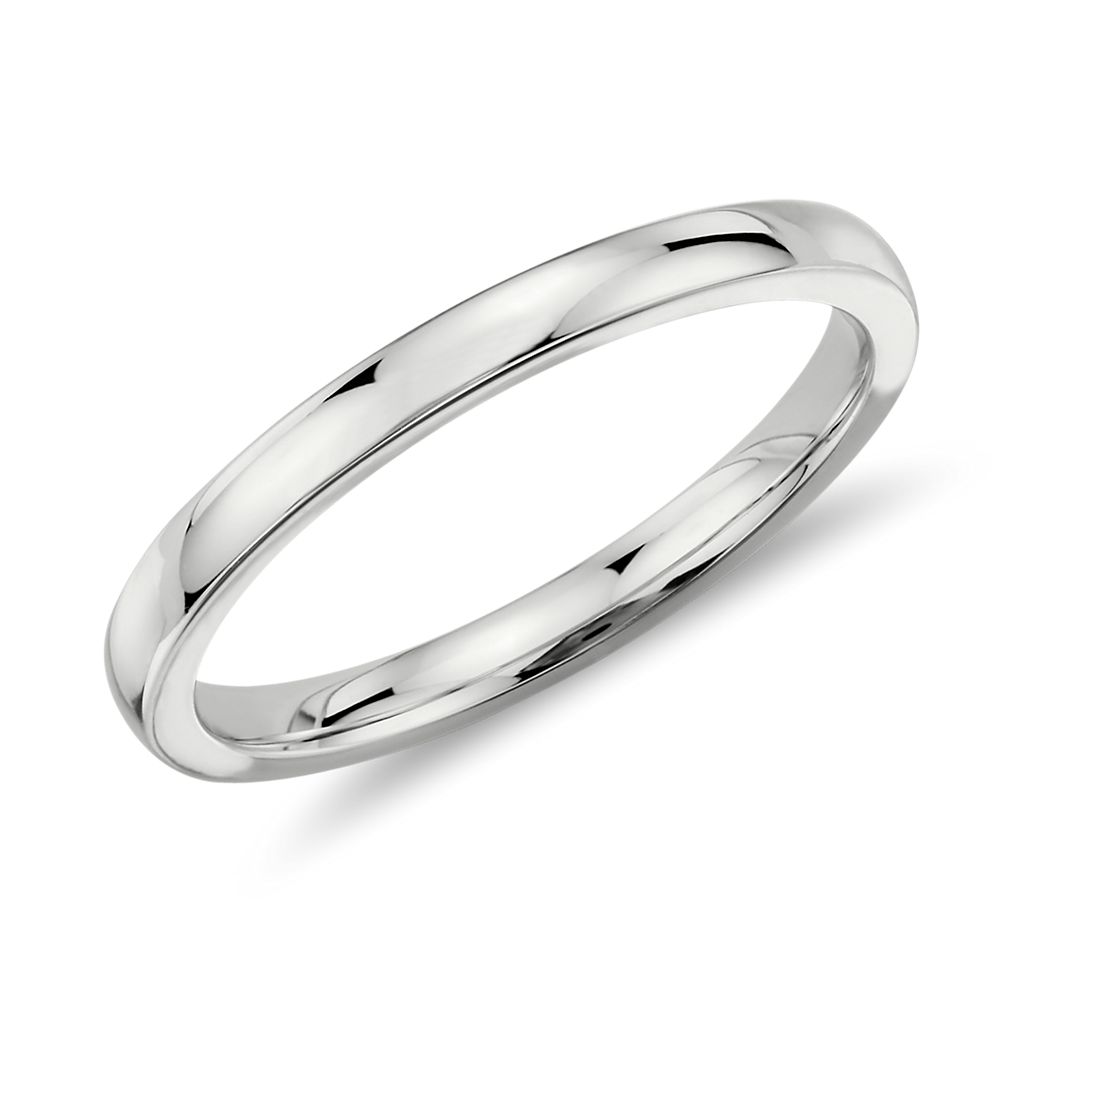 Low Dome Comfort Fit Wedding Ring in 14k White Gold (2 mm)